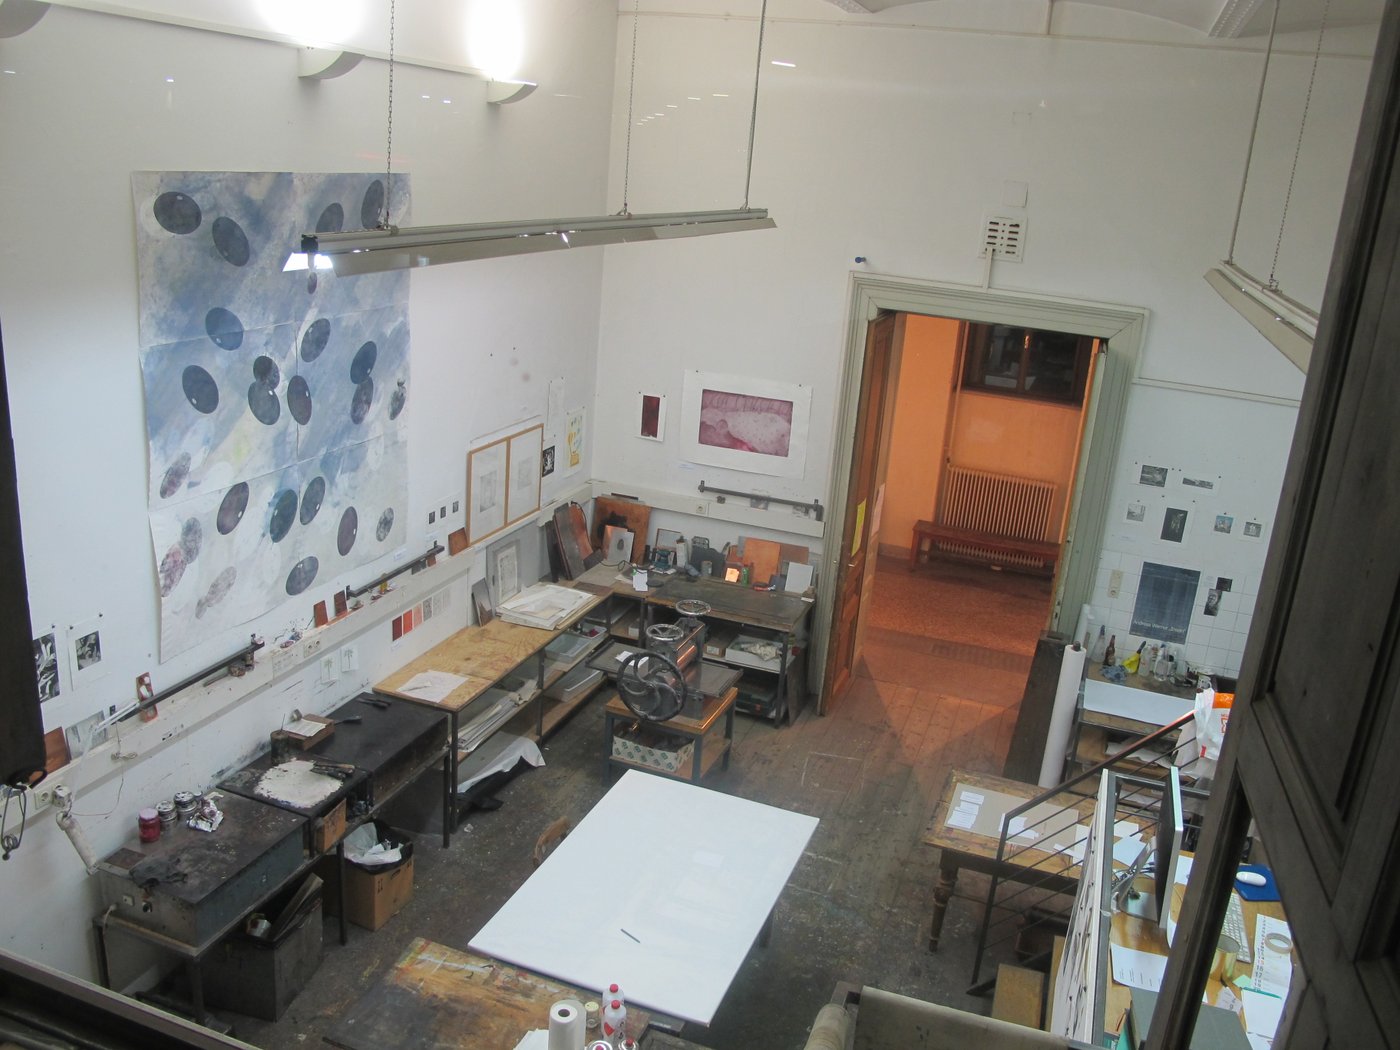 View into the workshop from above